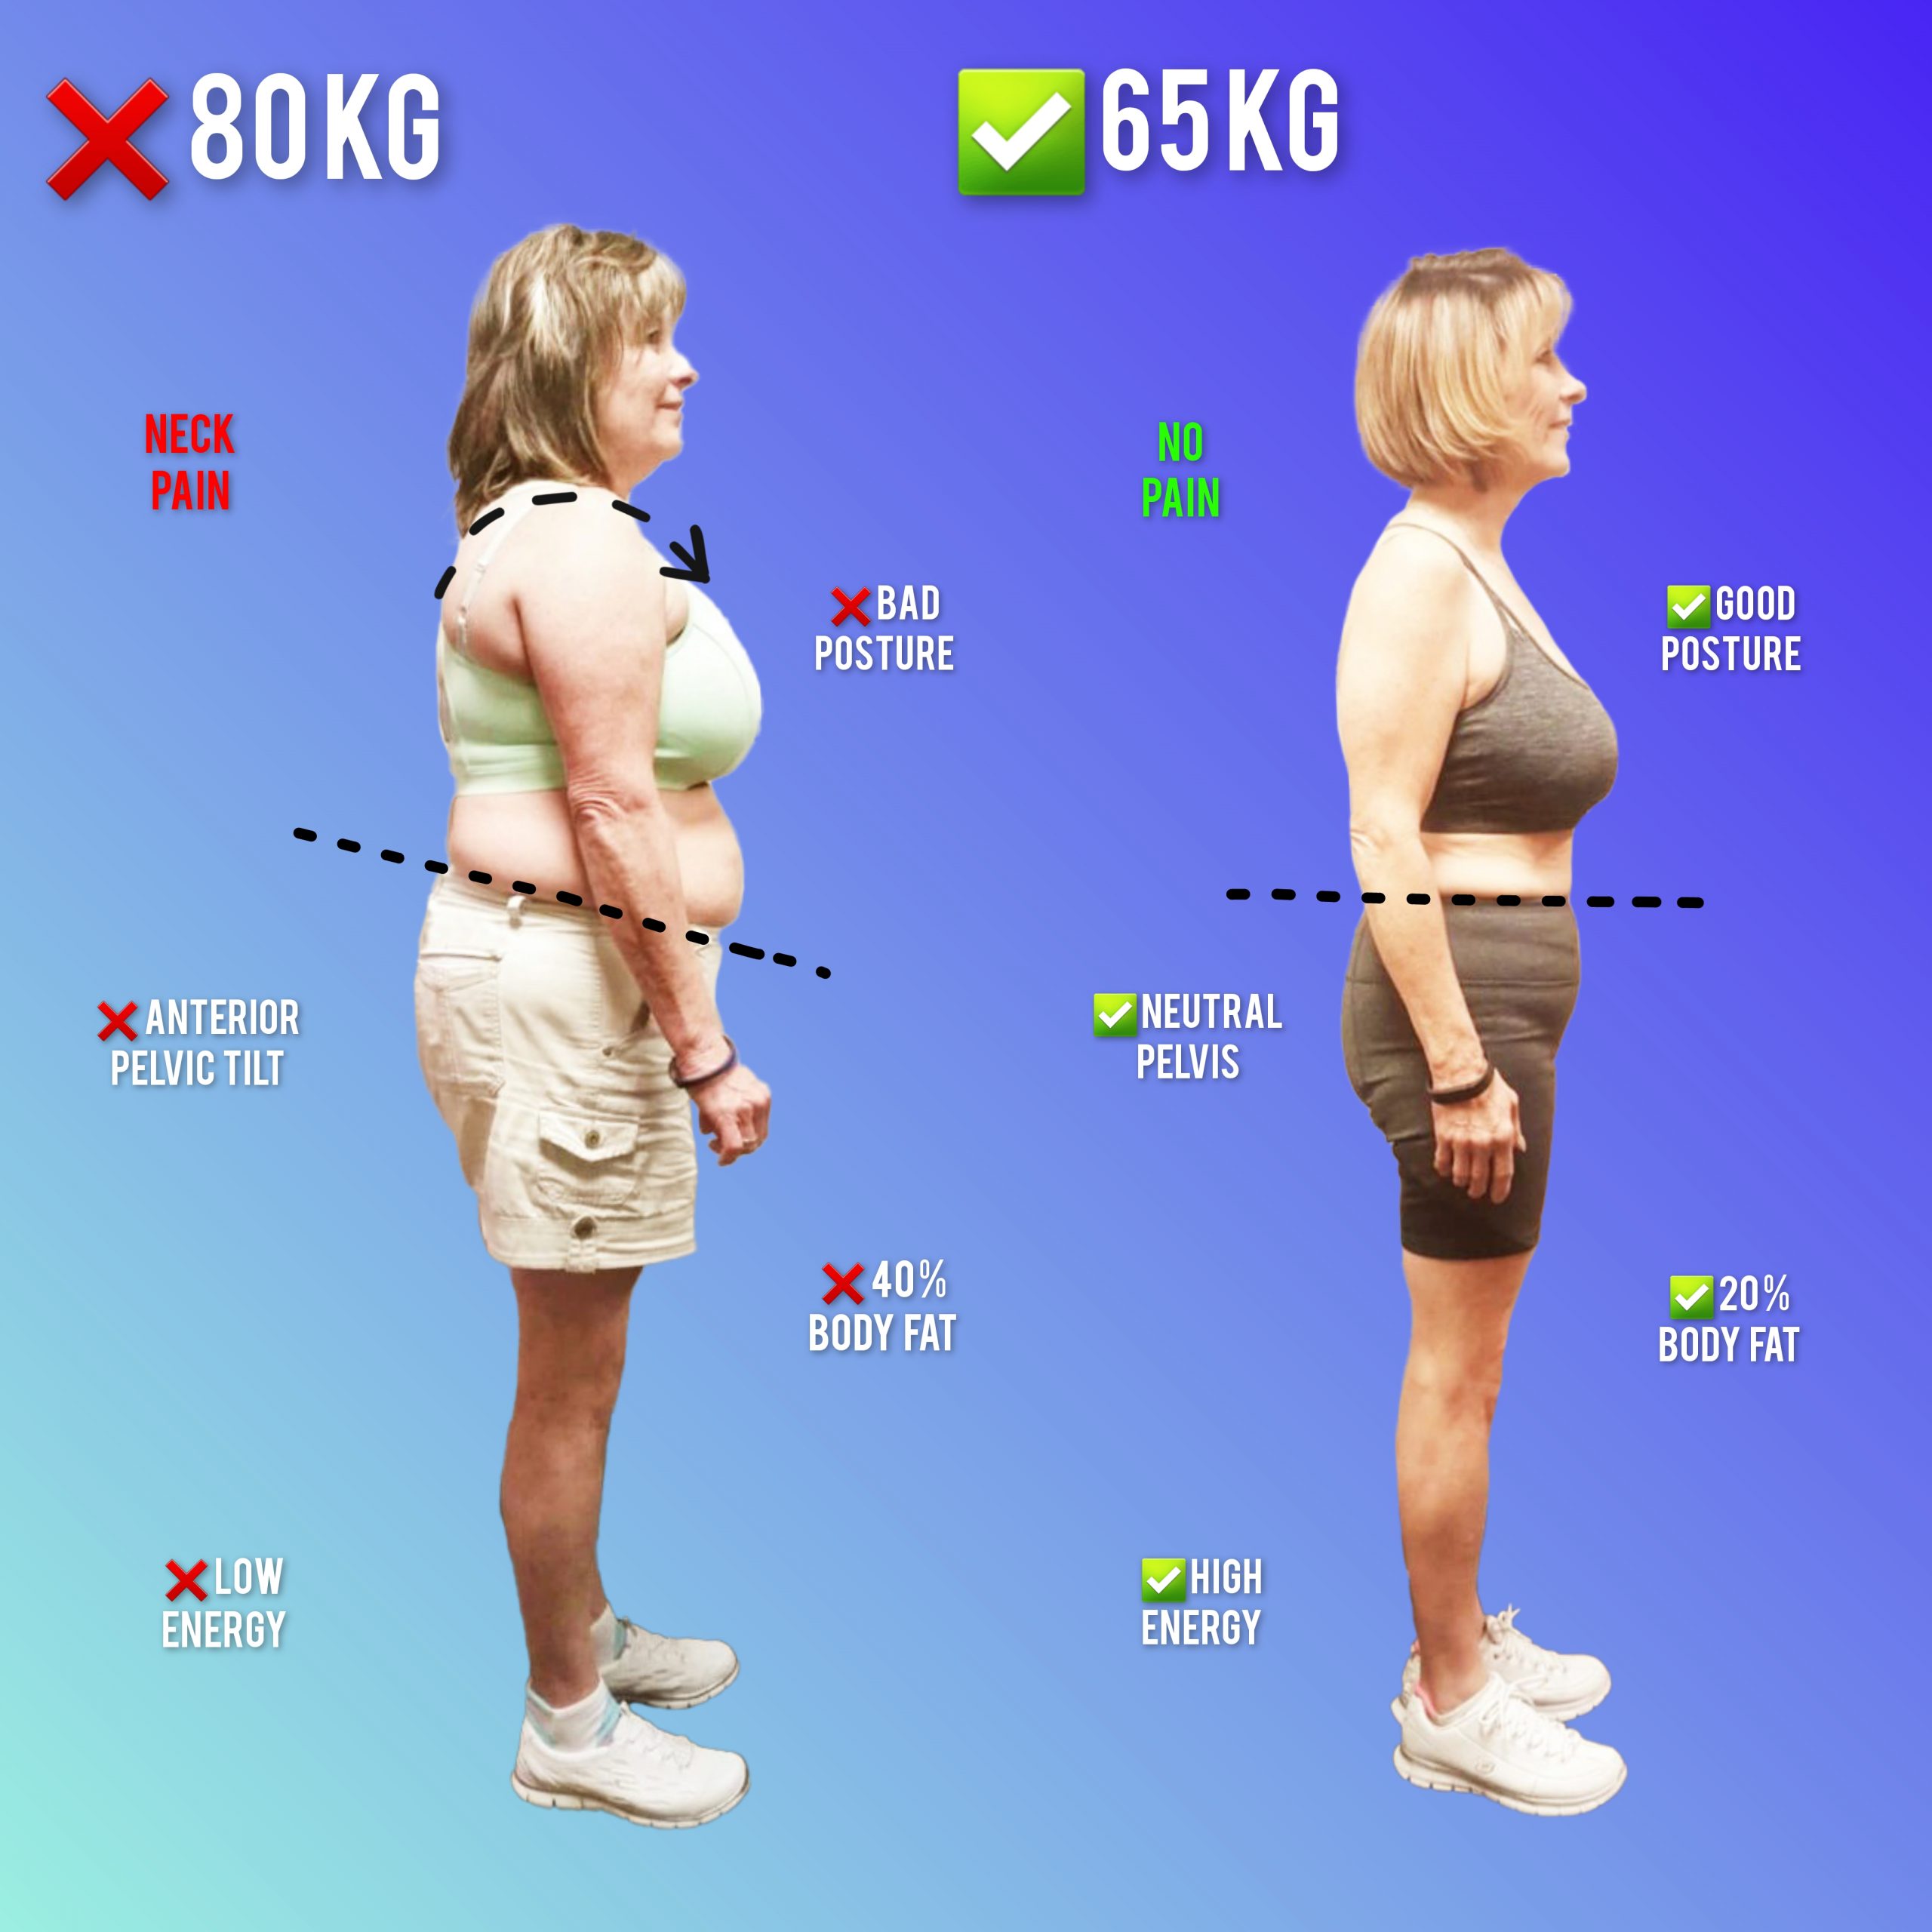 Weight loss and postural correction results MihaPower